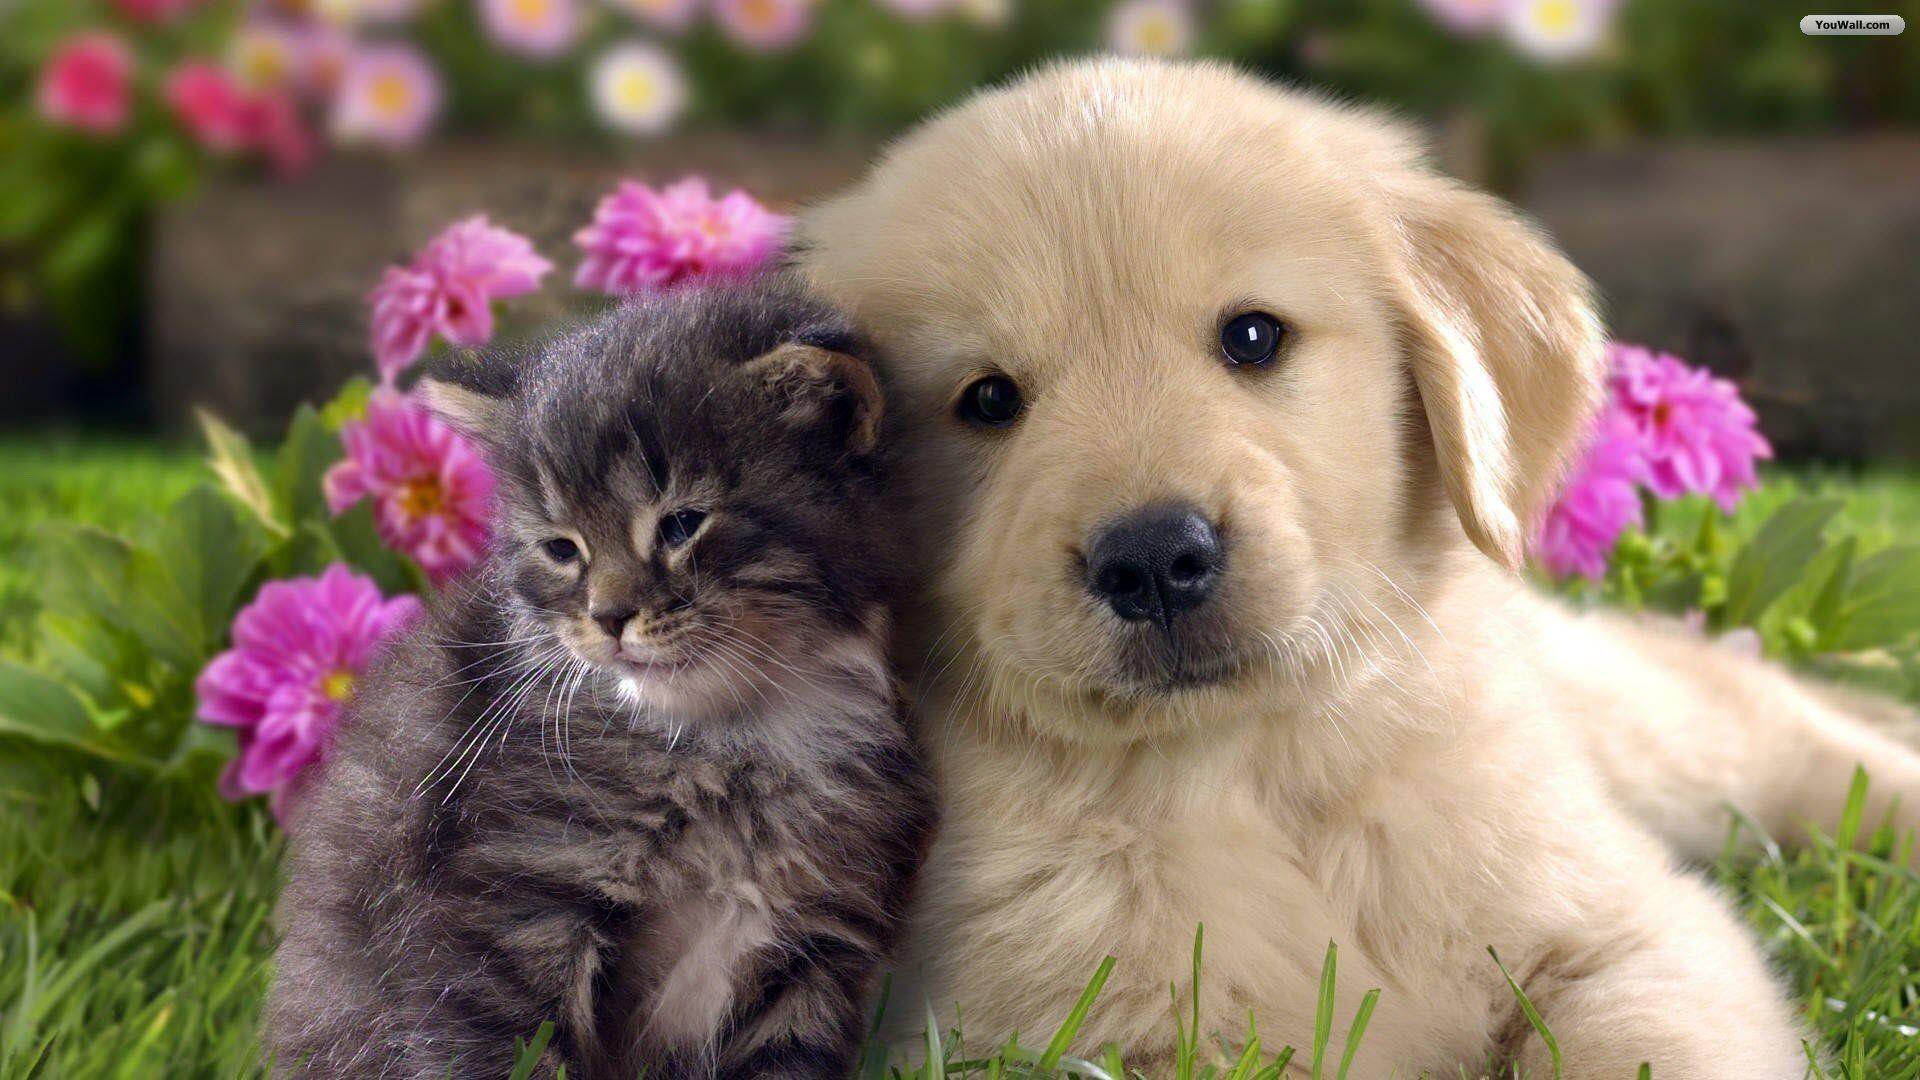 Cat And Dog Wallpaper 90 20852 High Definition Wallpaper